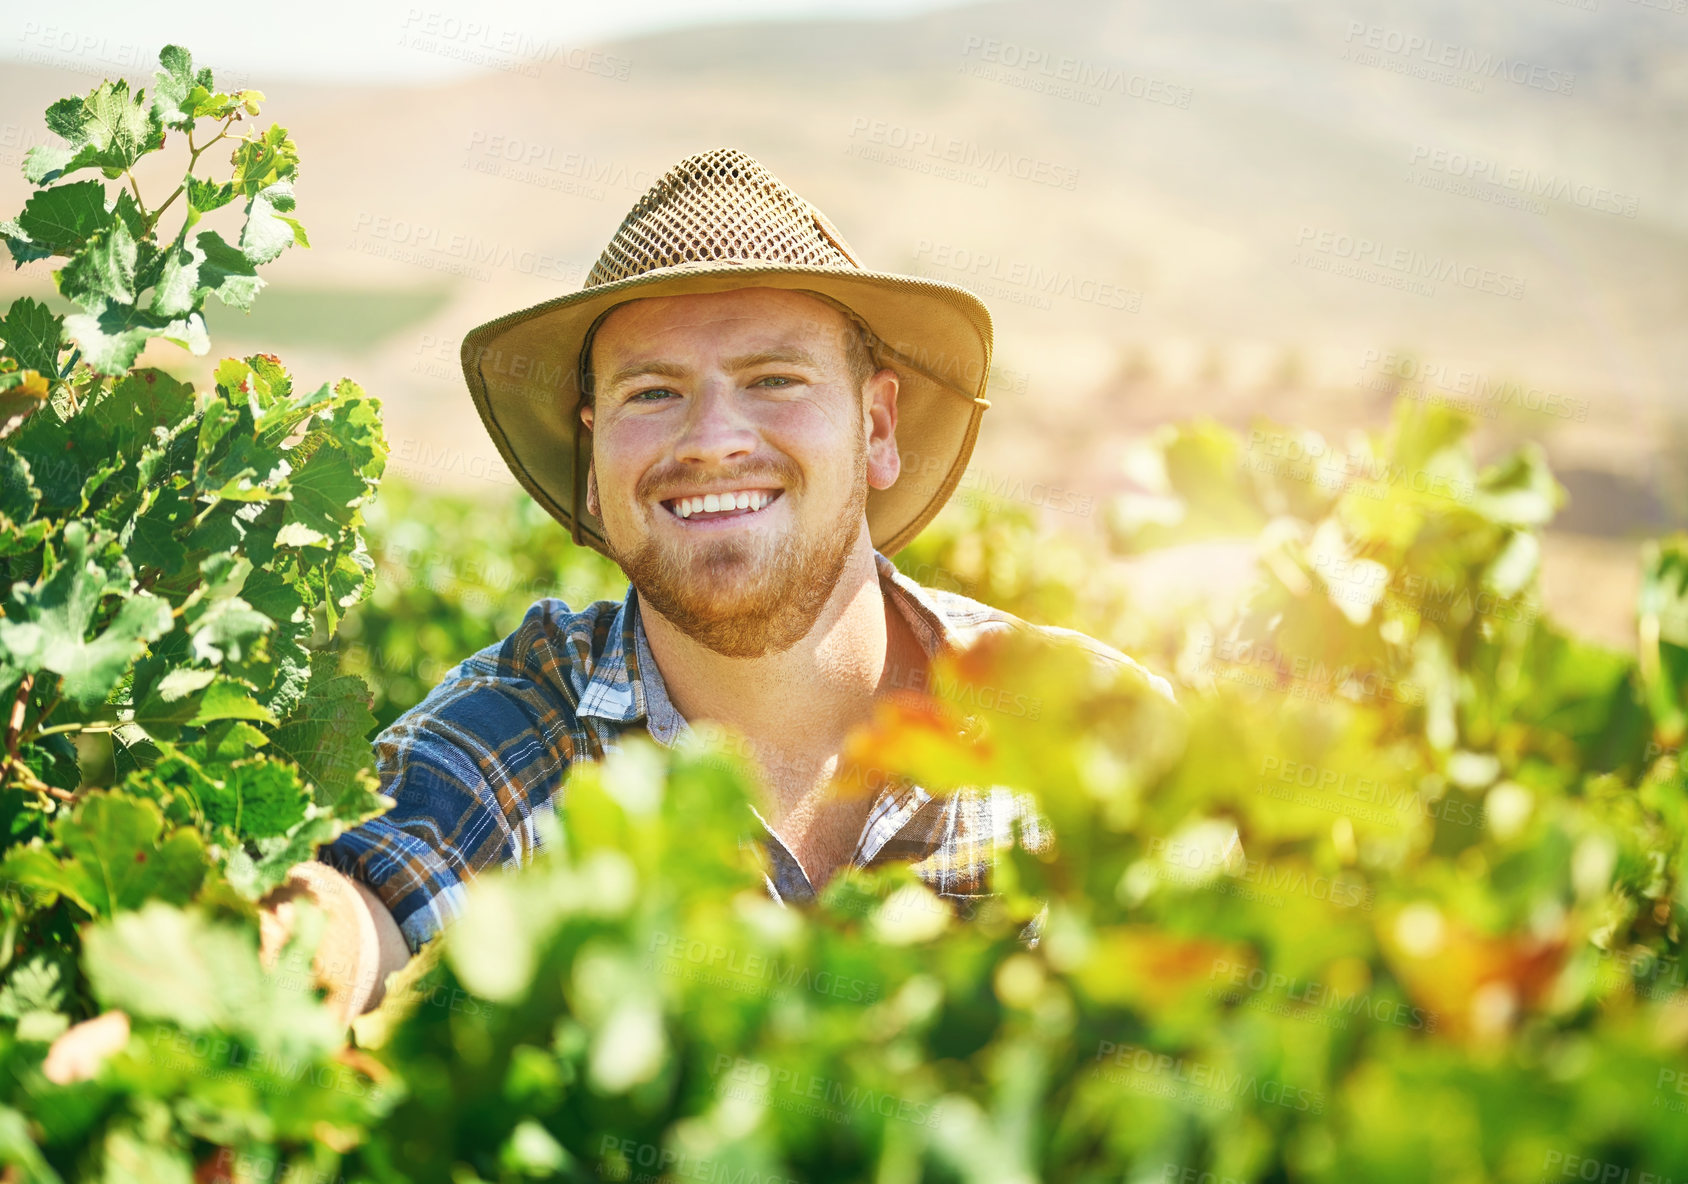 Buy stock photo Shot of a farmer out on his rounds in his vineyard